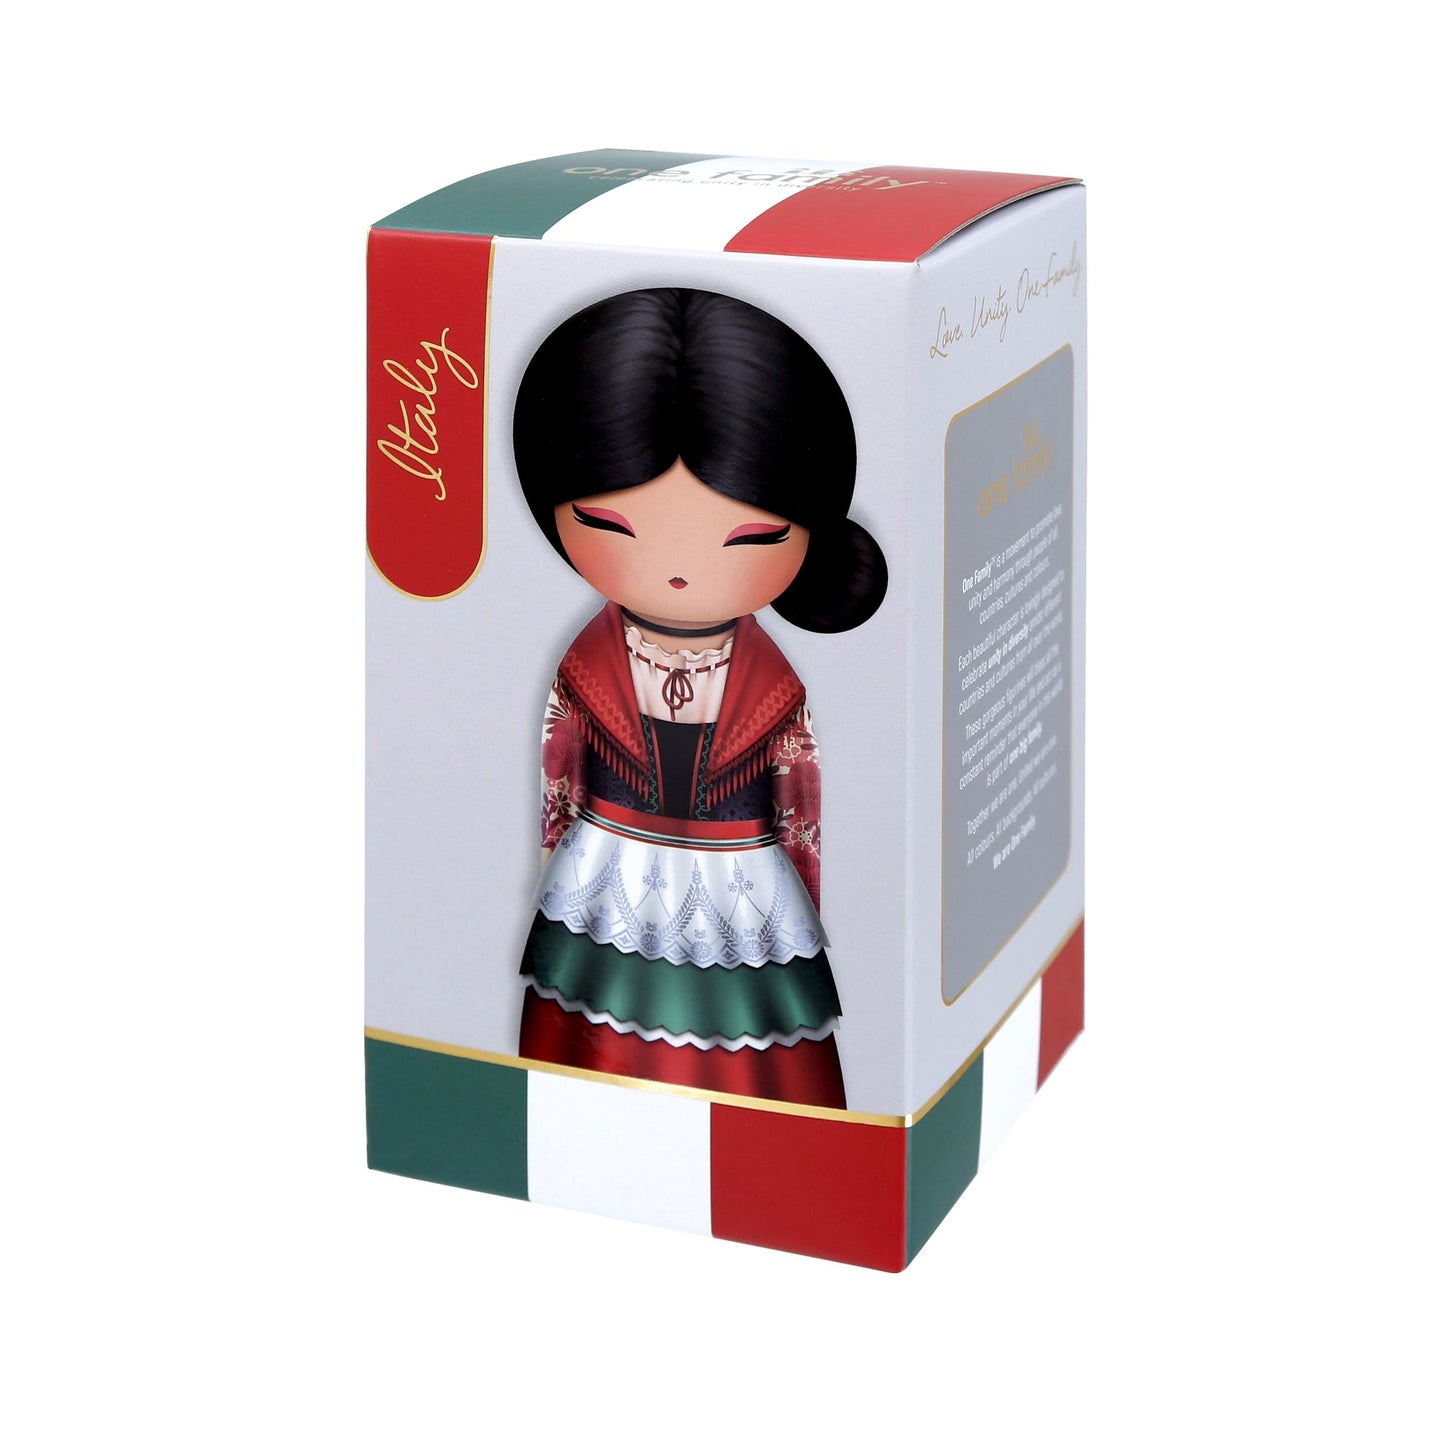 Italy - Collectable Figurine